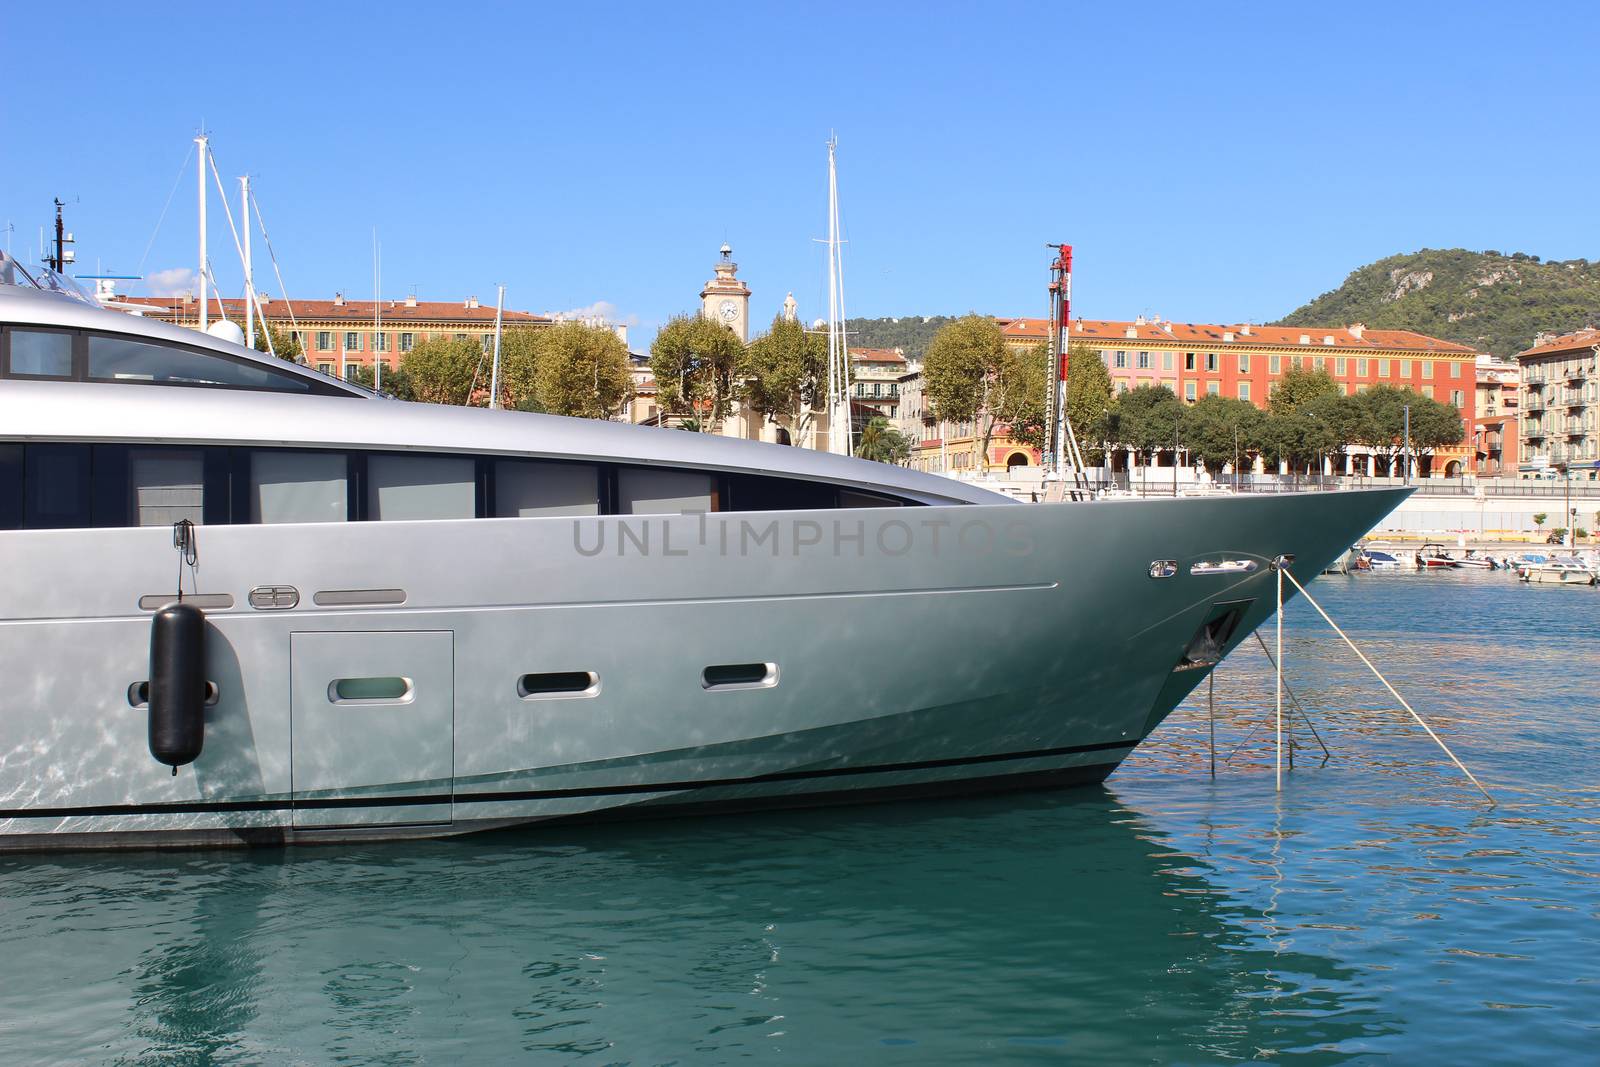 Beautiful and luxurious yacht in the port of Nice